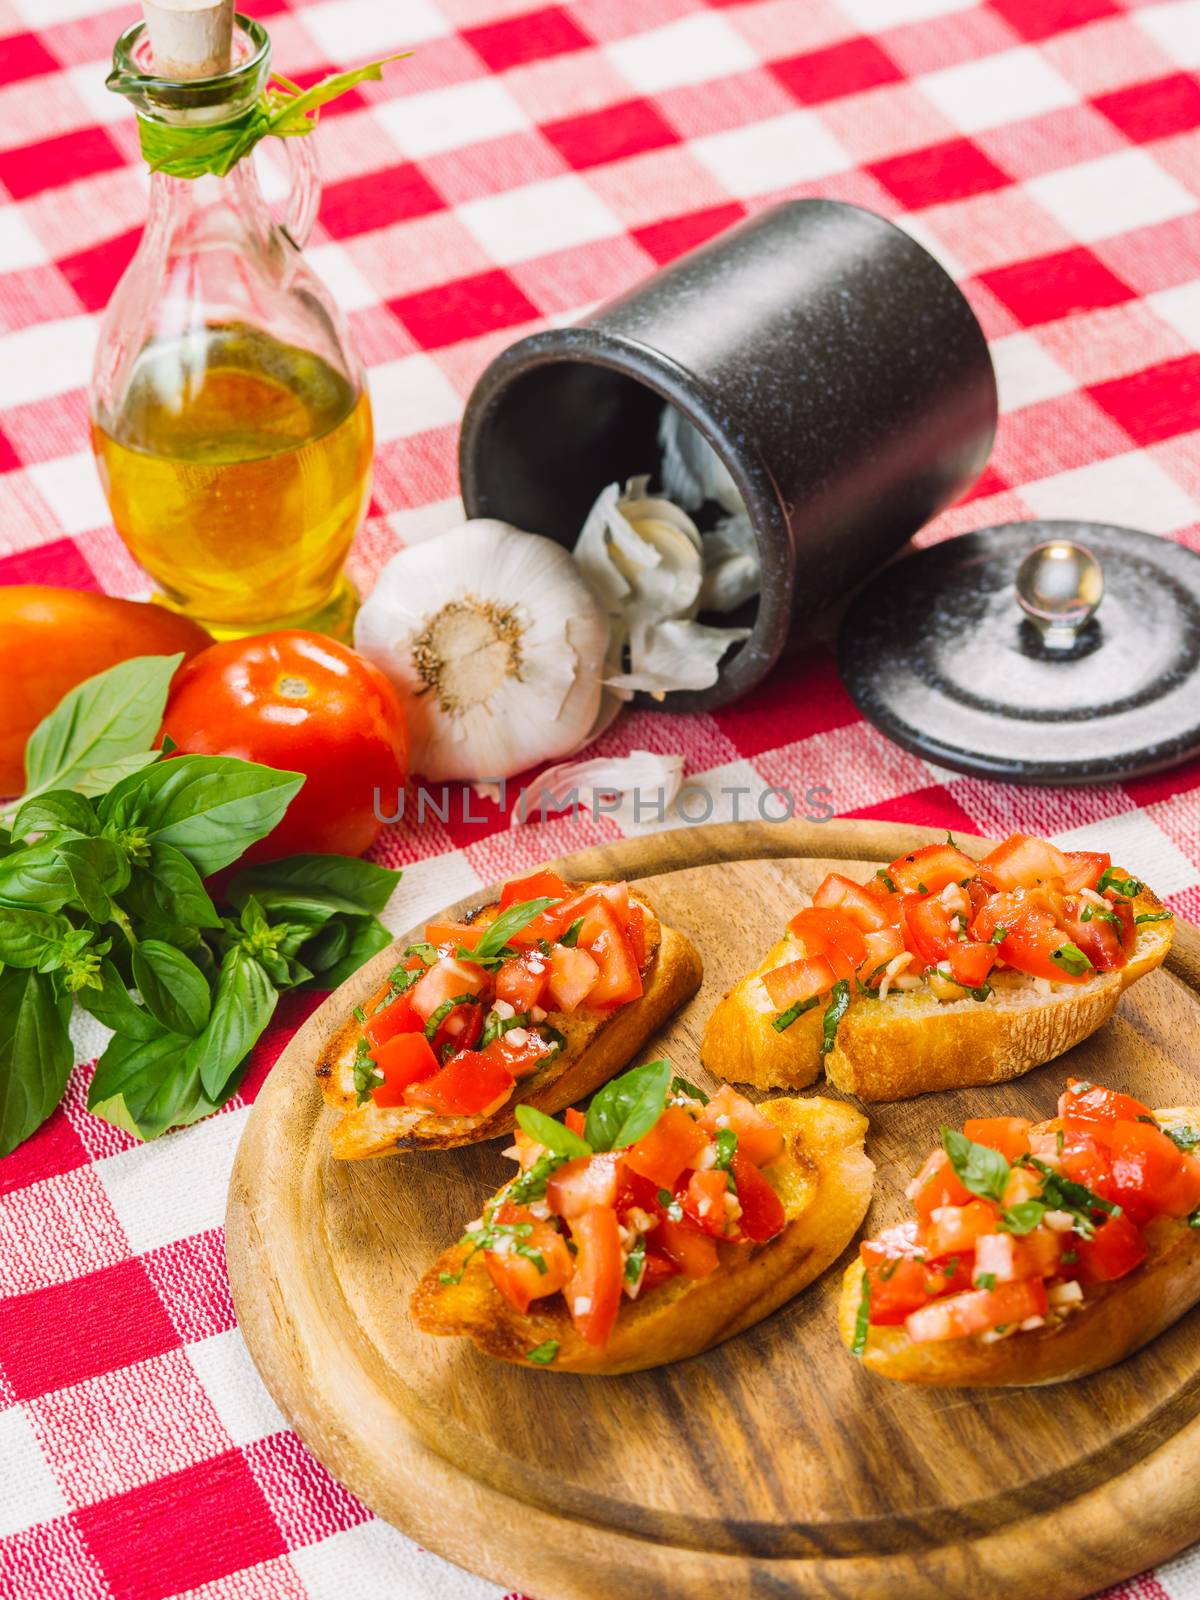 Bruschetta with ingredients by sumners